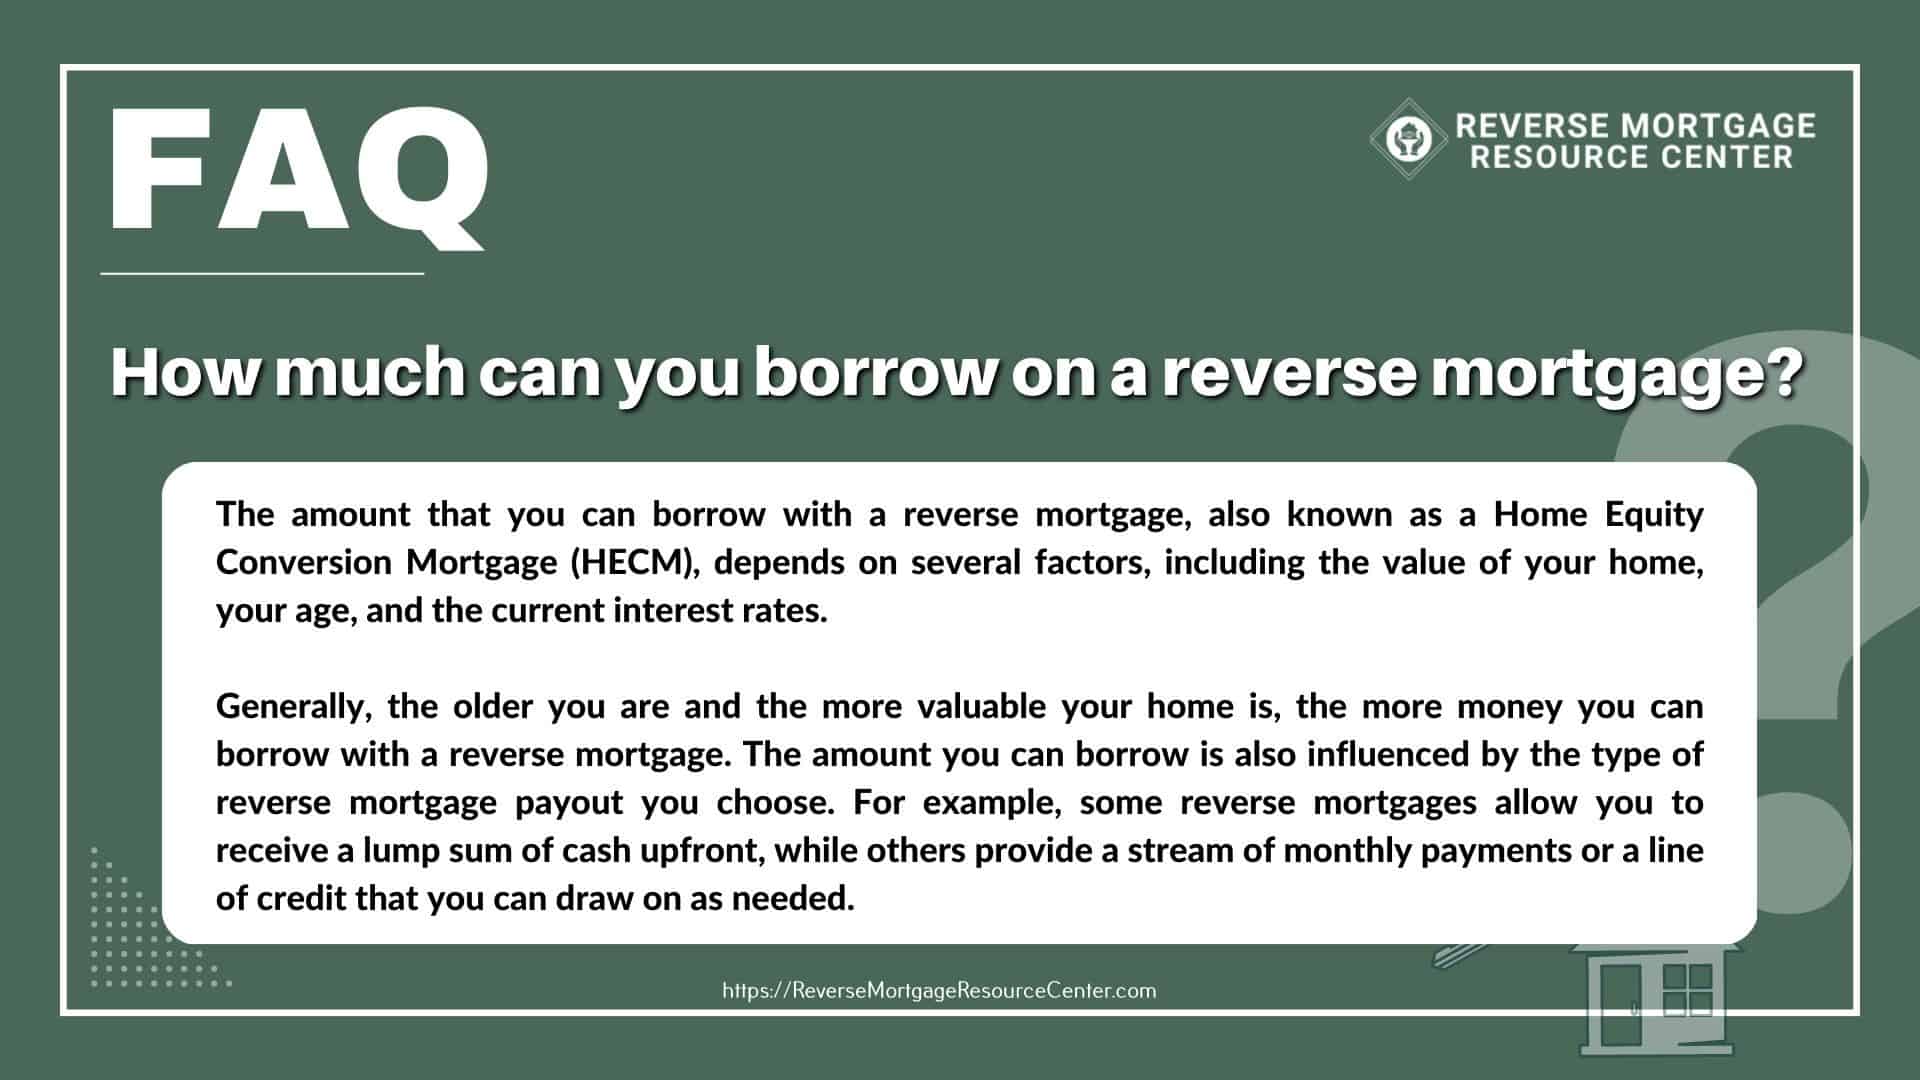 How much can you borrow on a reverse mortgage?